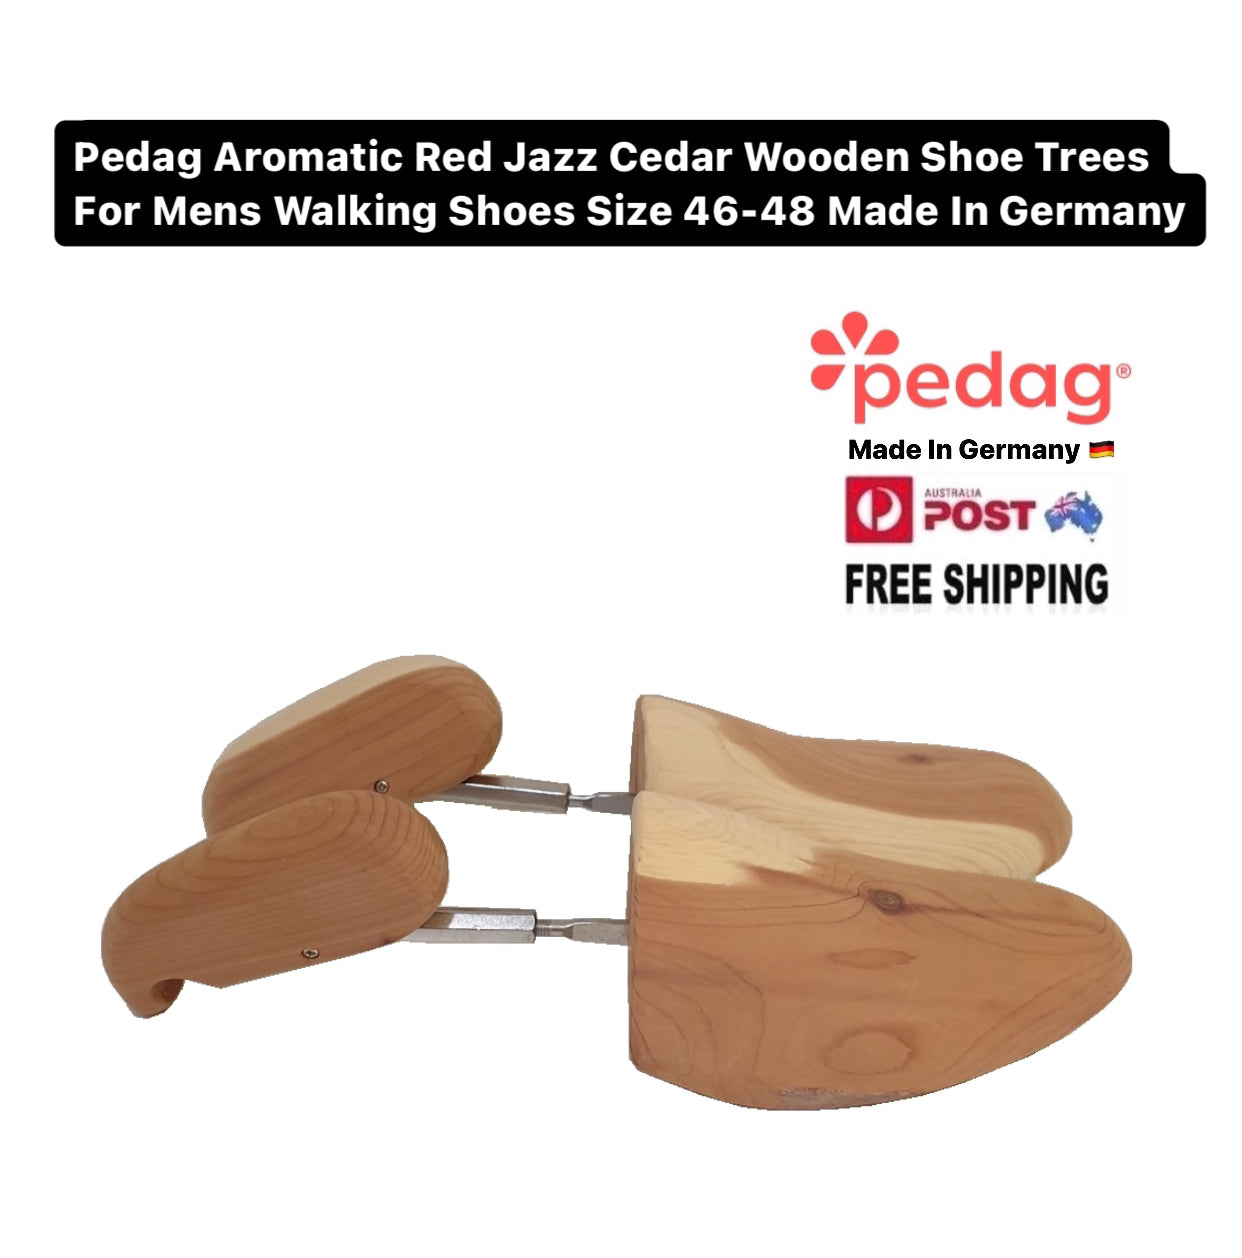 Pedag Aromatic Red Jazz Cedar Wooden Shoe Trees For Mens Walking Shoes Size 46-48 Made In Germany